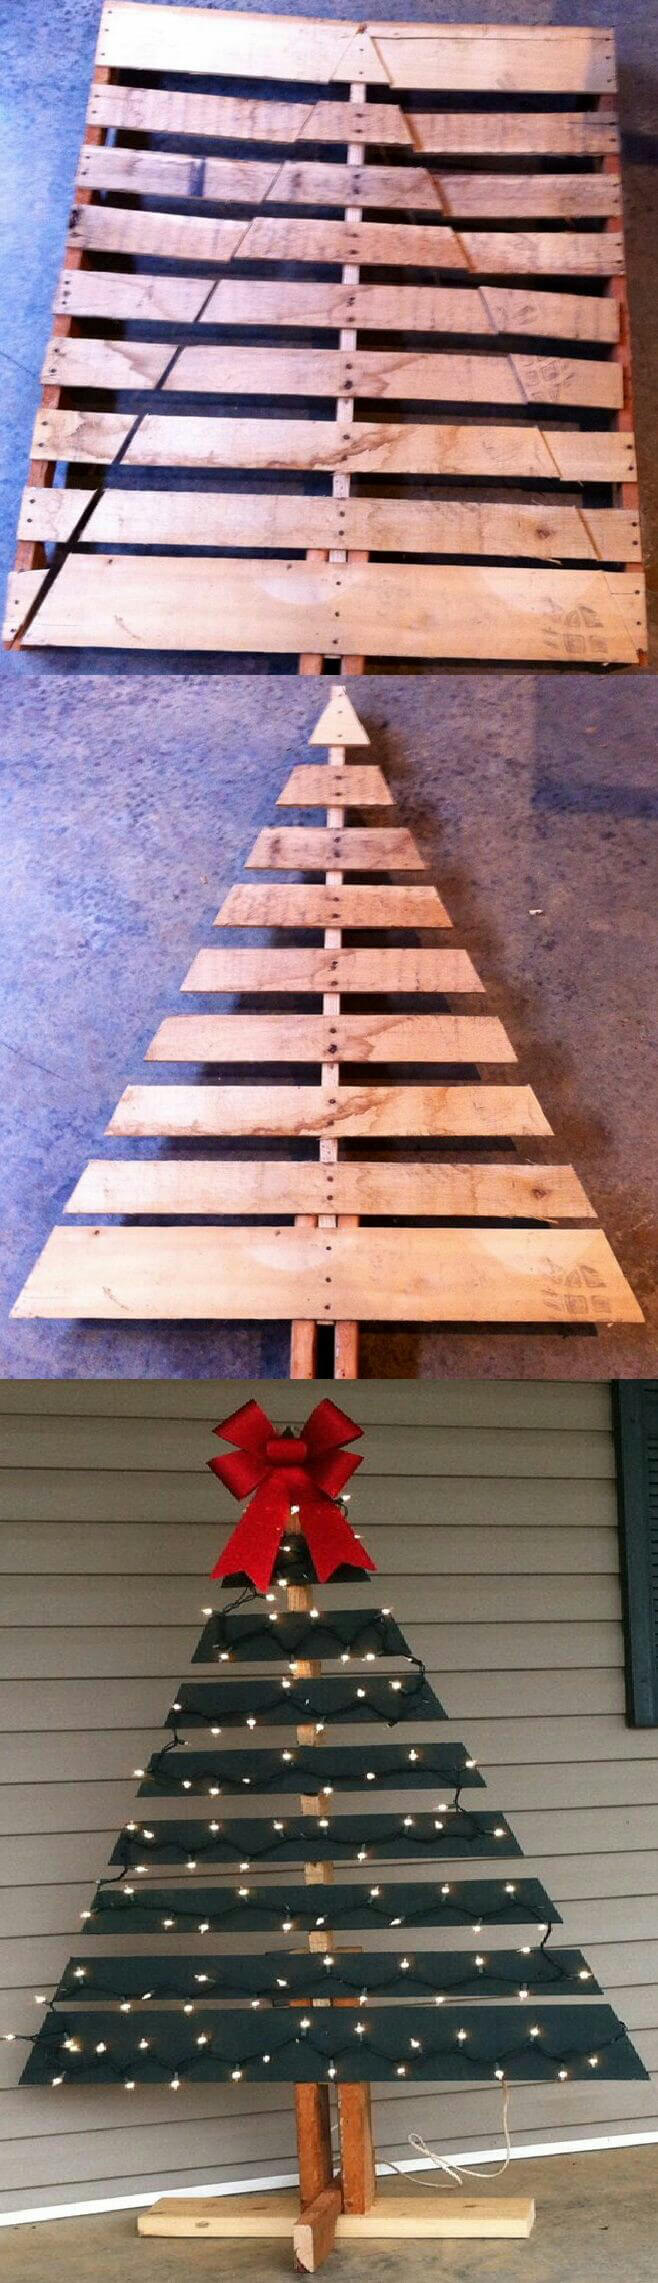 Another Spin on the Pallet Christmas Tree